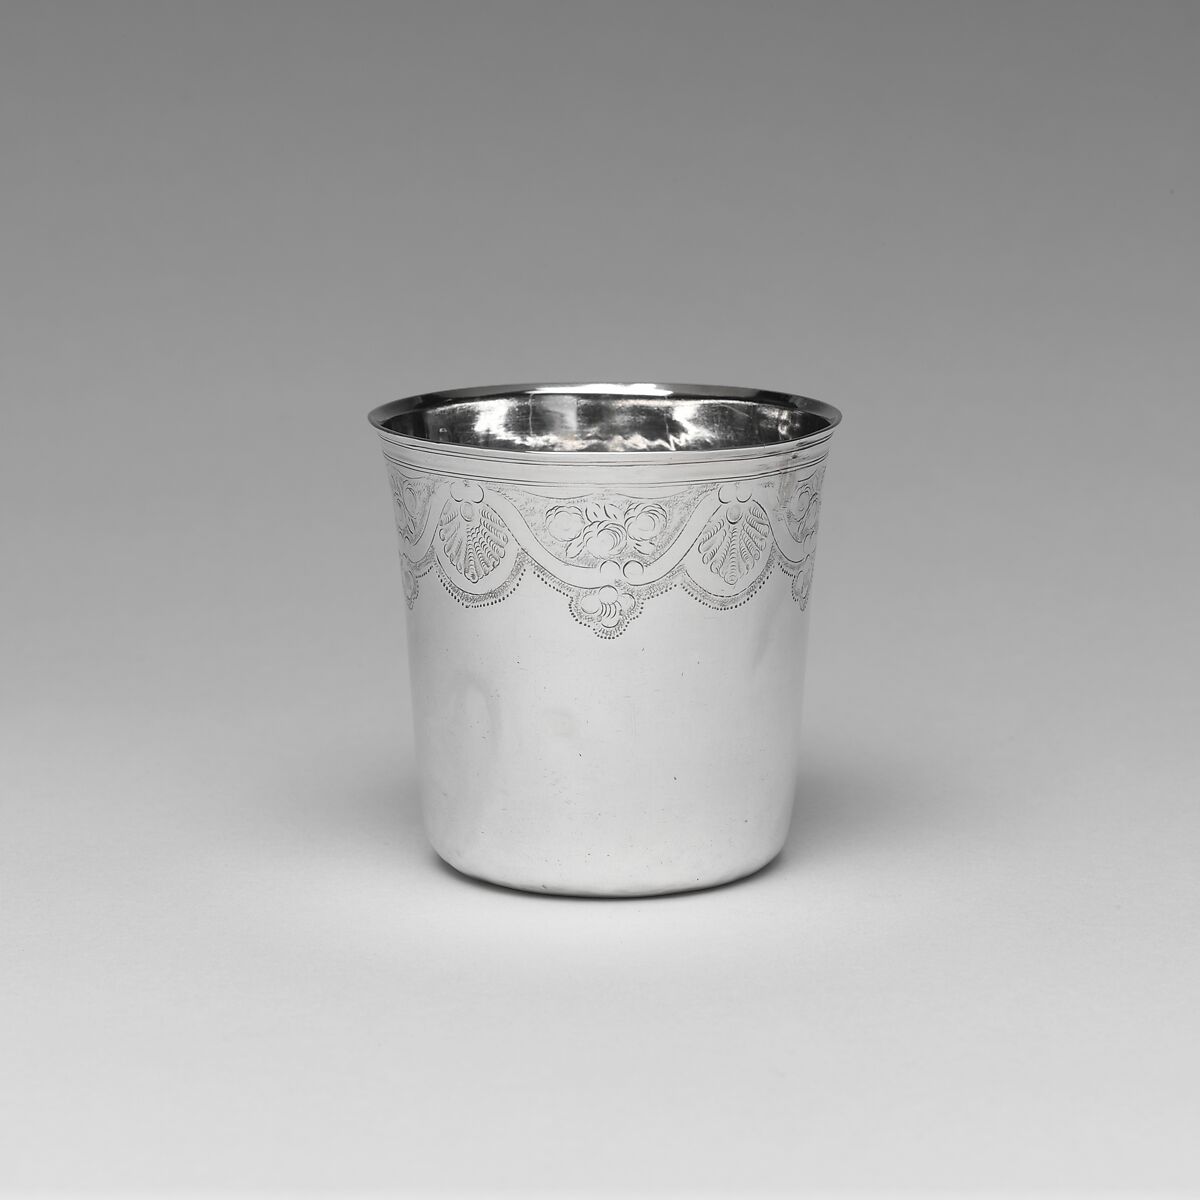 Tumbler, Denis Colombier (active 1776–after 1806), Silver, French 